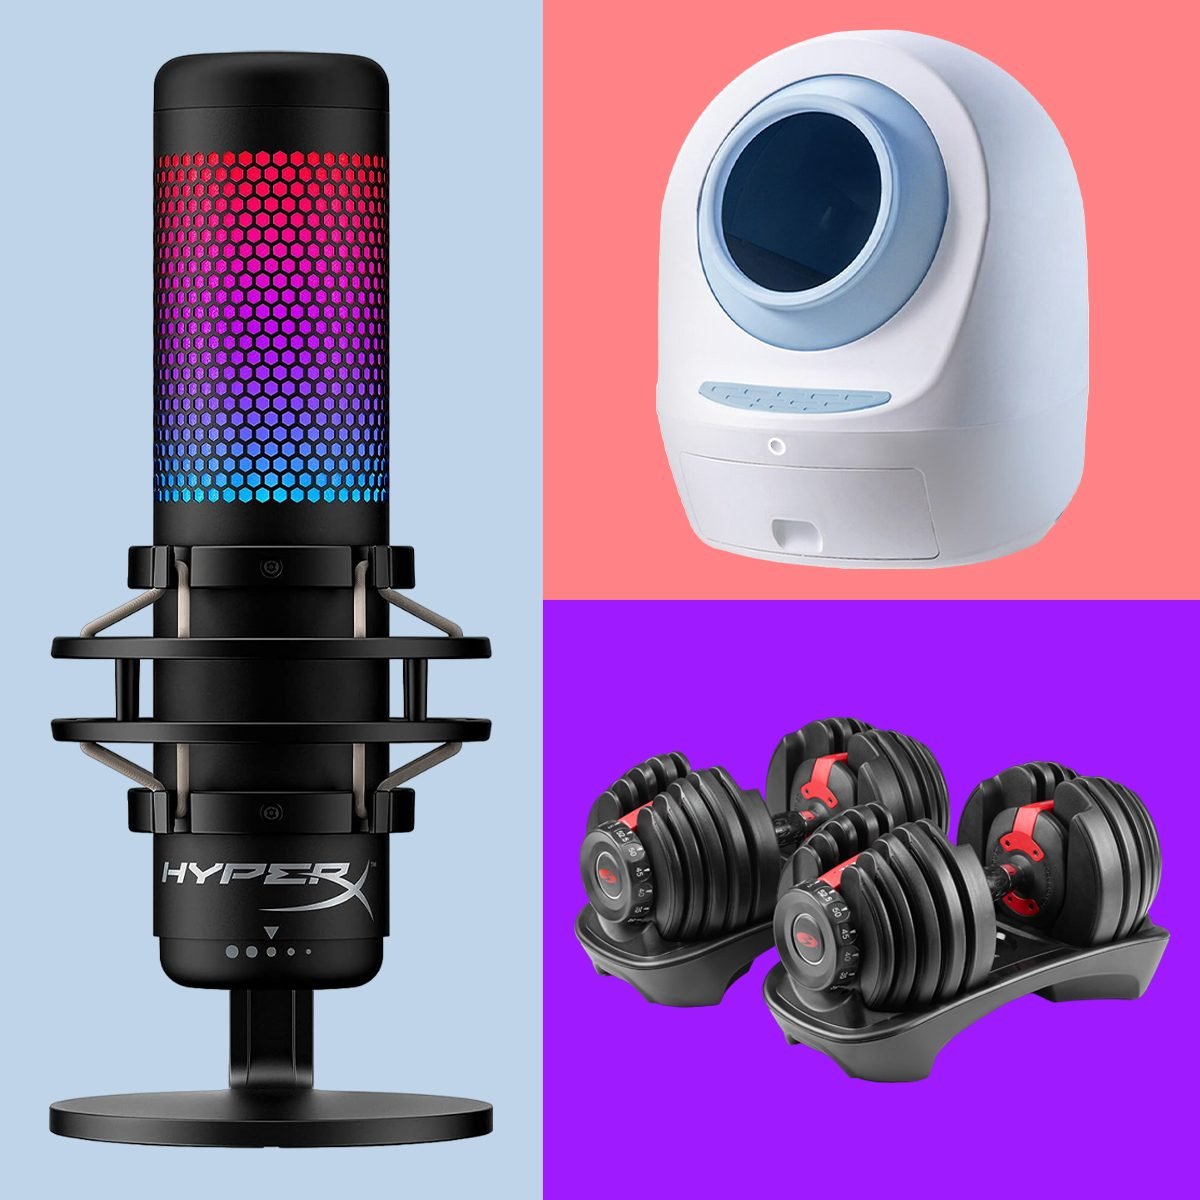 25 Amazingly Cool Gadget Gifts You May Want To Keep For Yourself